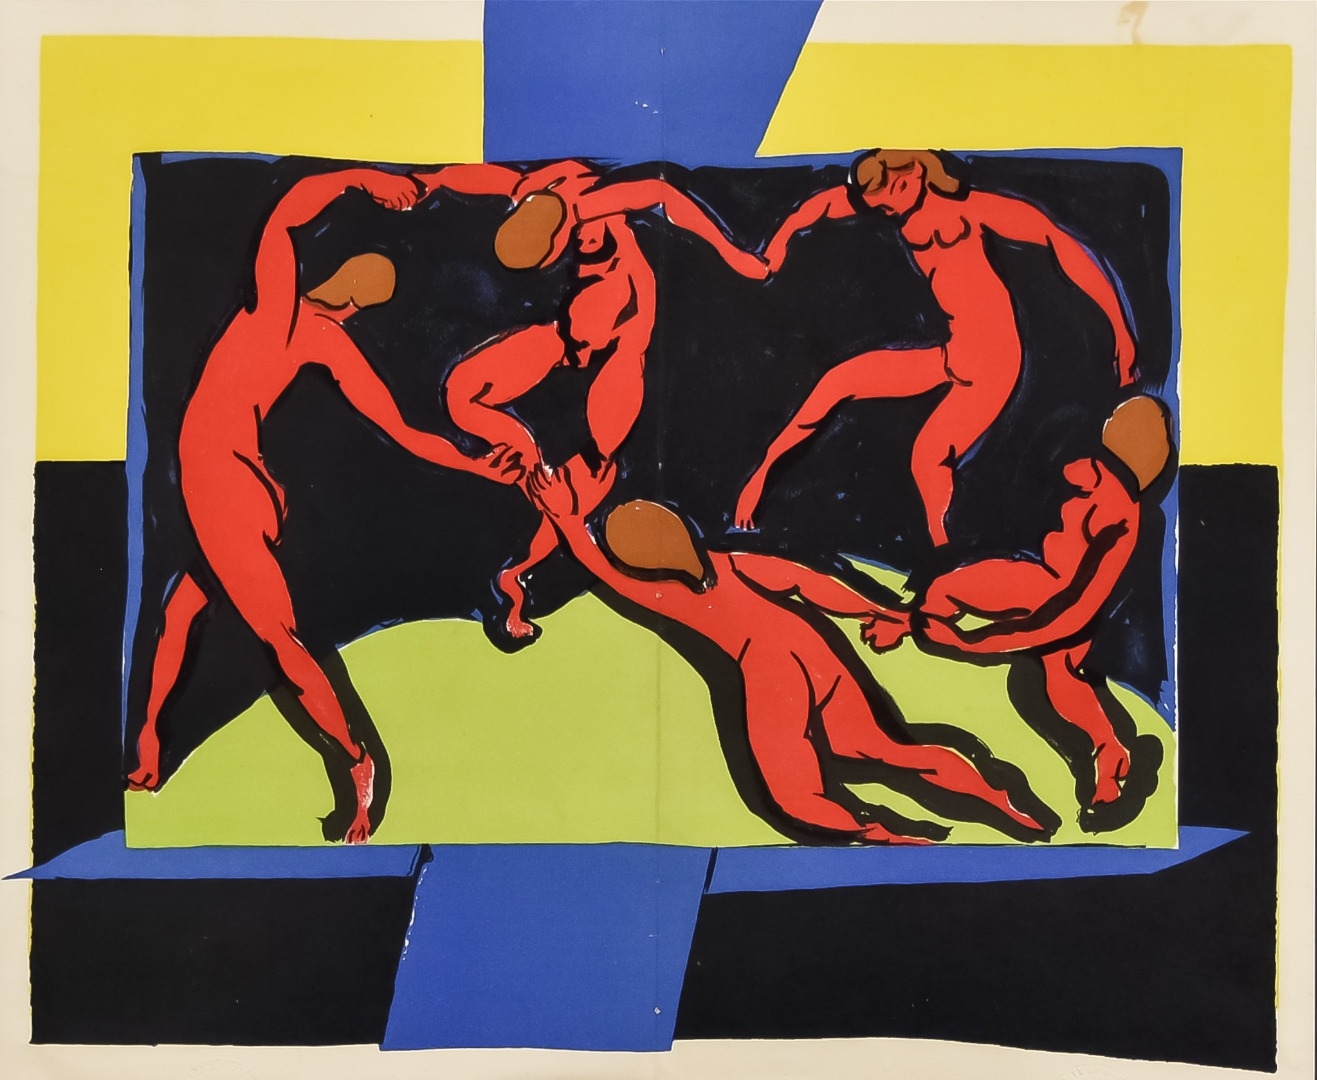 Artwork by Henri Matisse, "The Dance", Made of Lithograph in colours